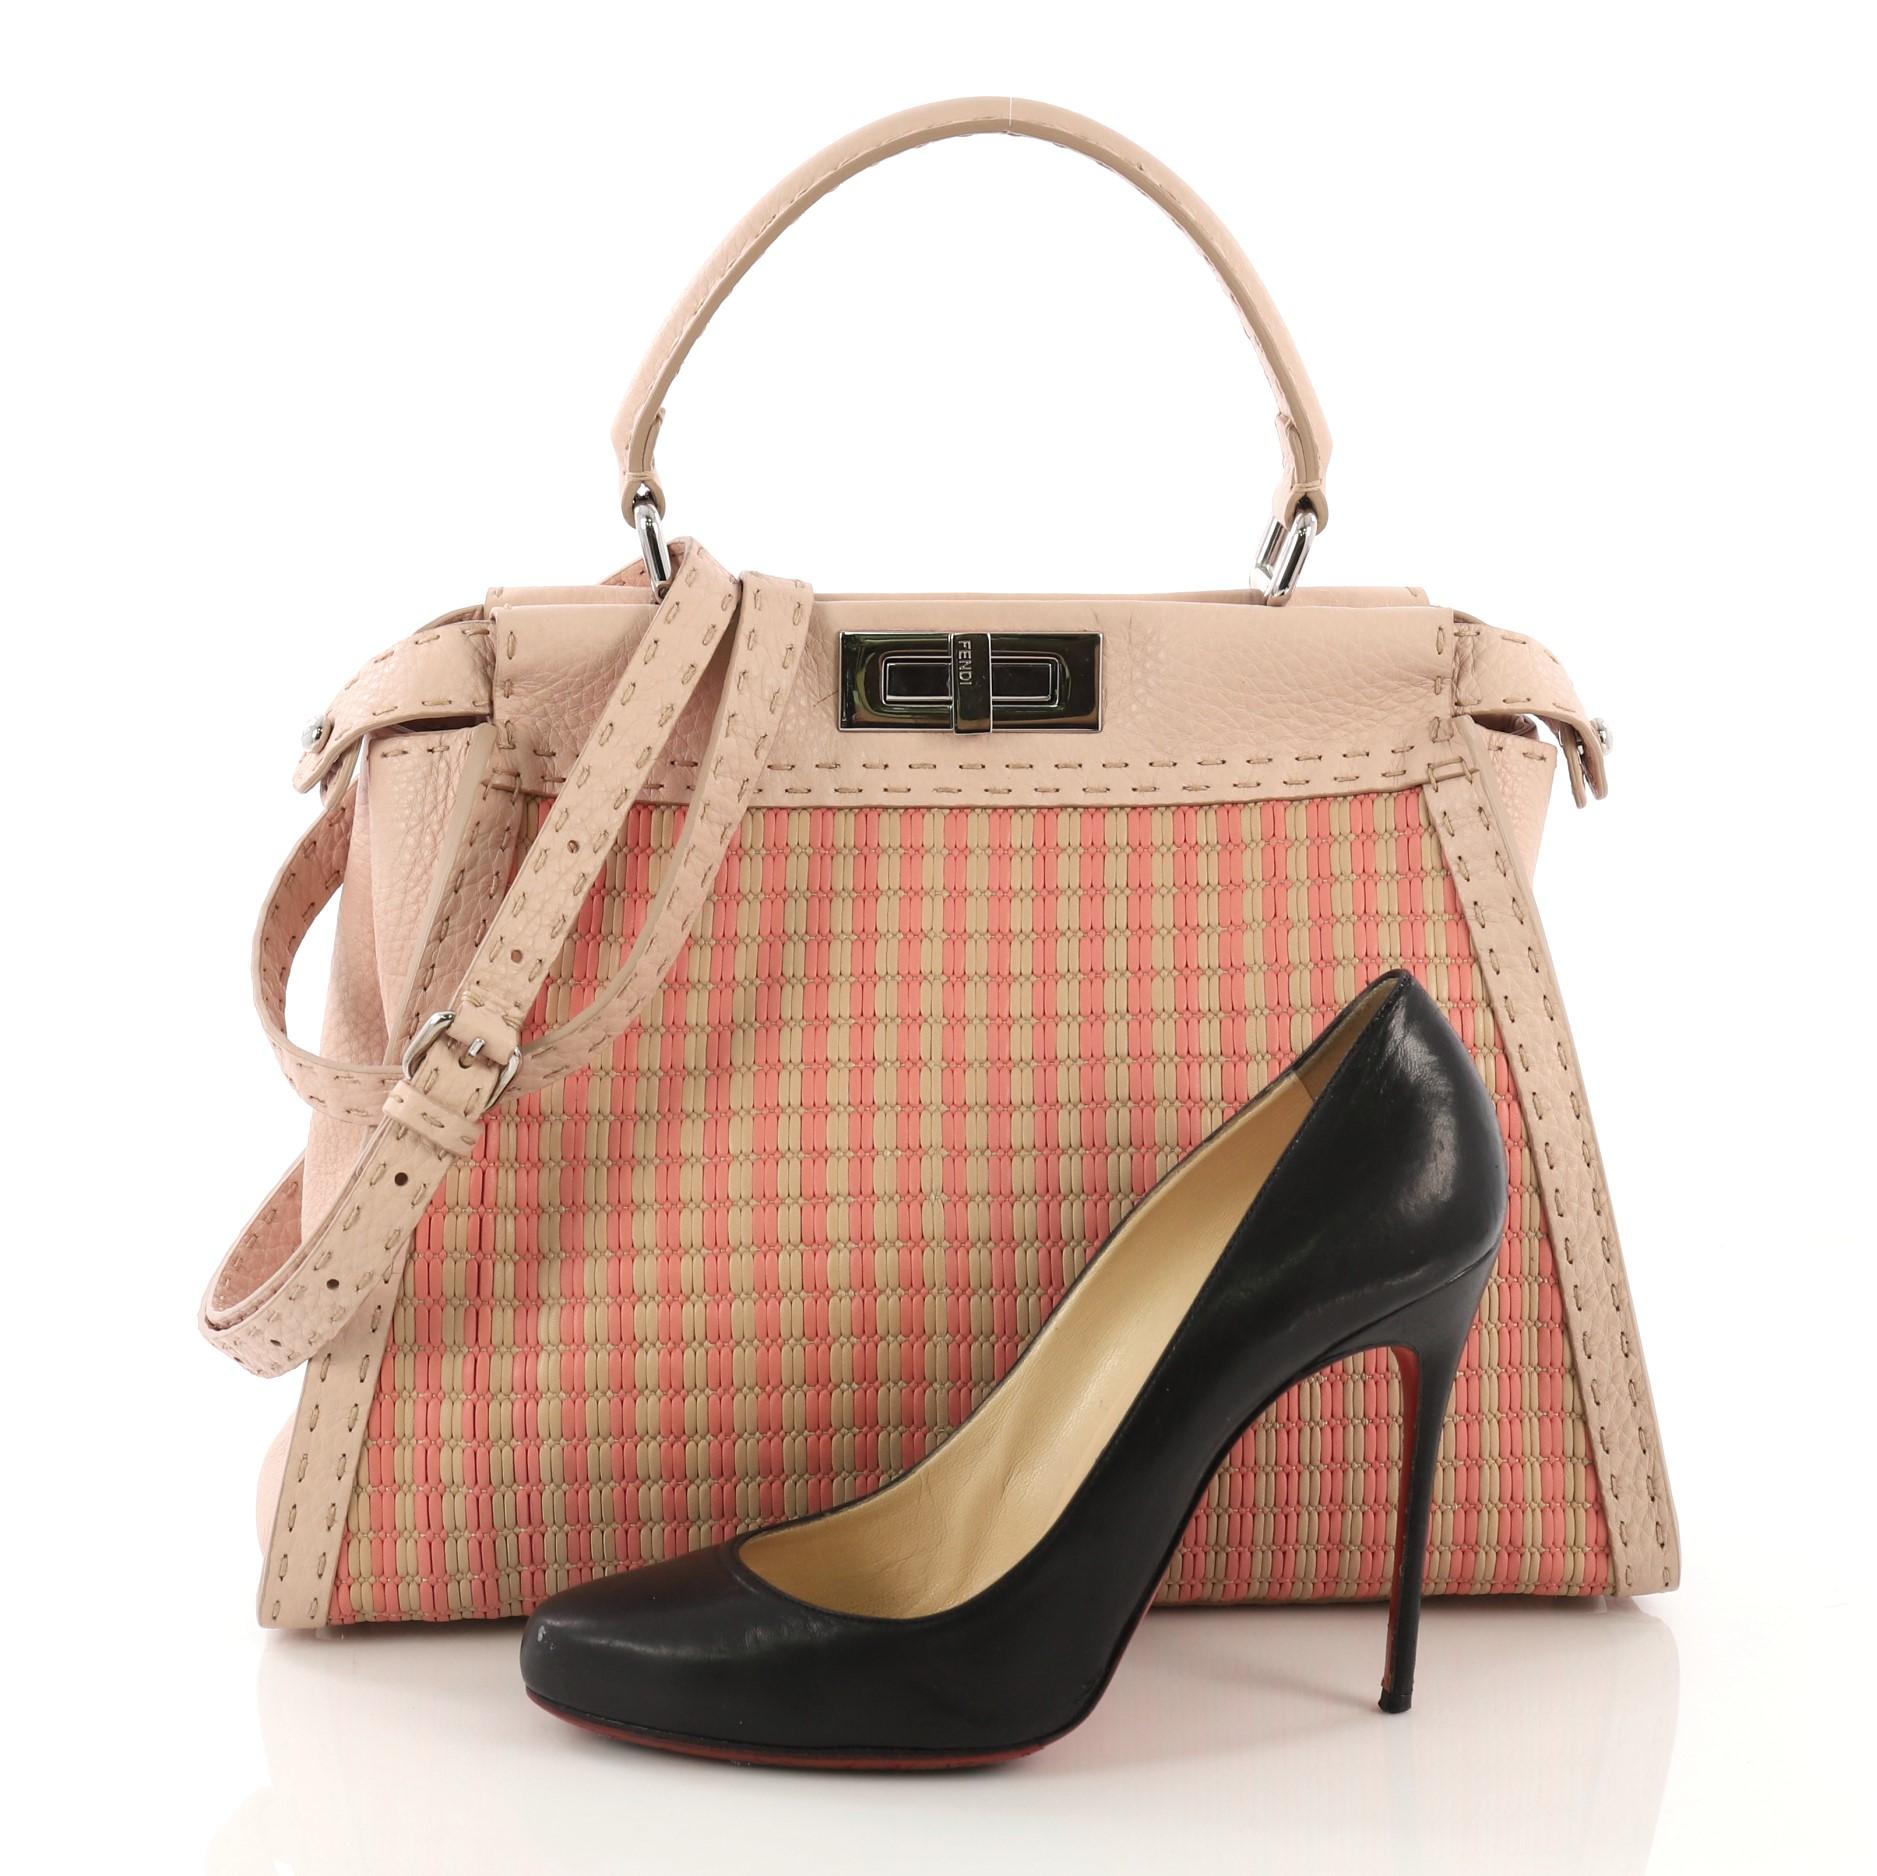 This Fendi Selleria Peekaboo Bag Woven Leather Regular, crafted from pink woven leather, features a leather top handle, frame top, protective base studs and silver-tone hardware. Its two compartments with press-lock and zip closures opens to a pink